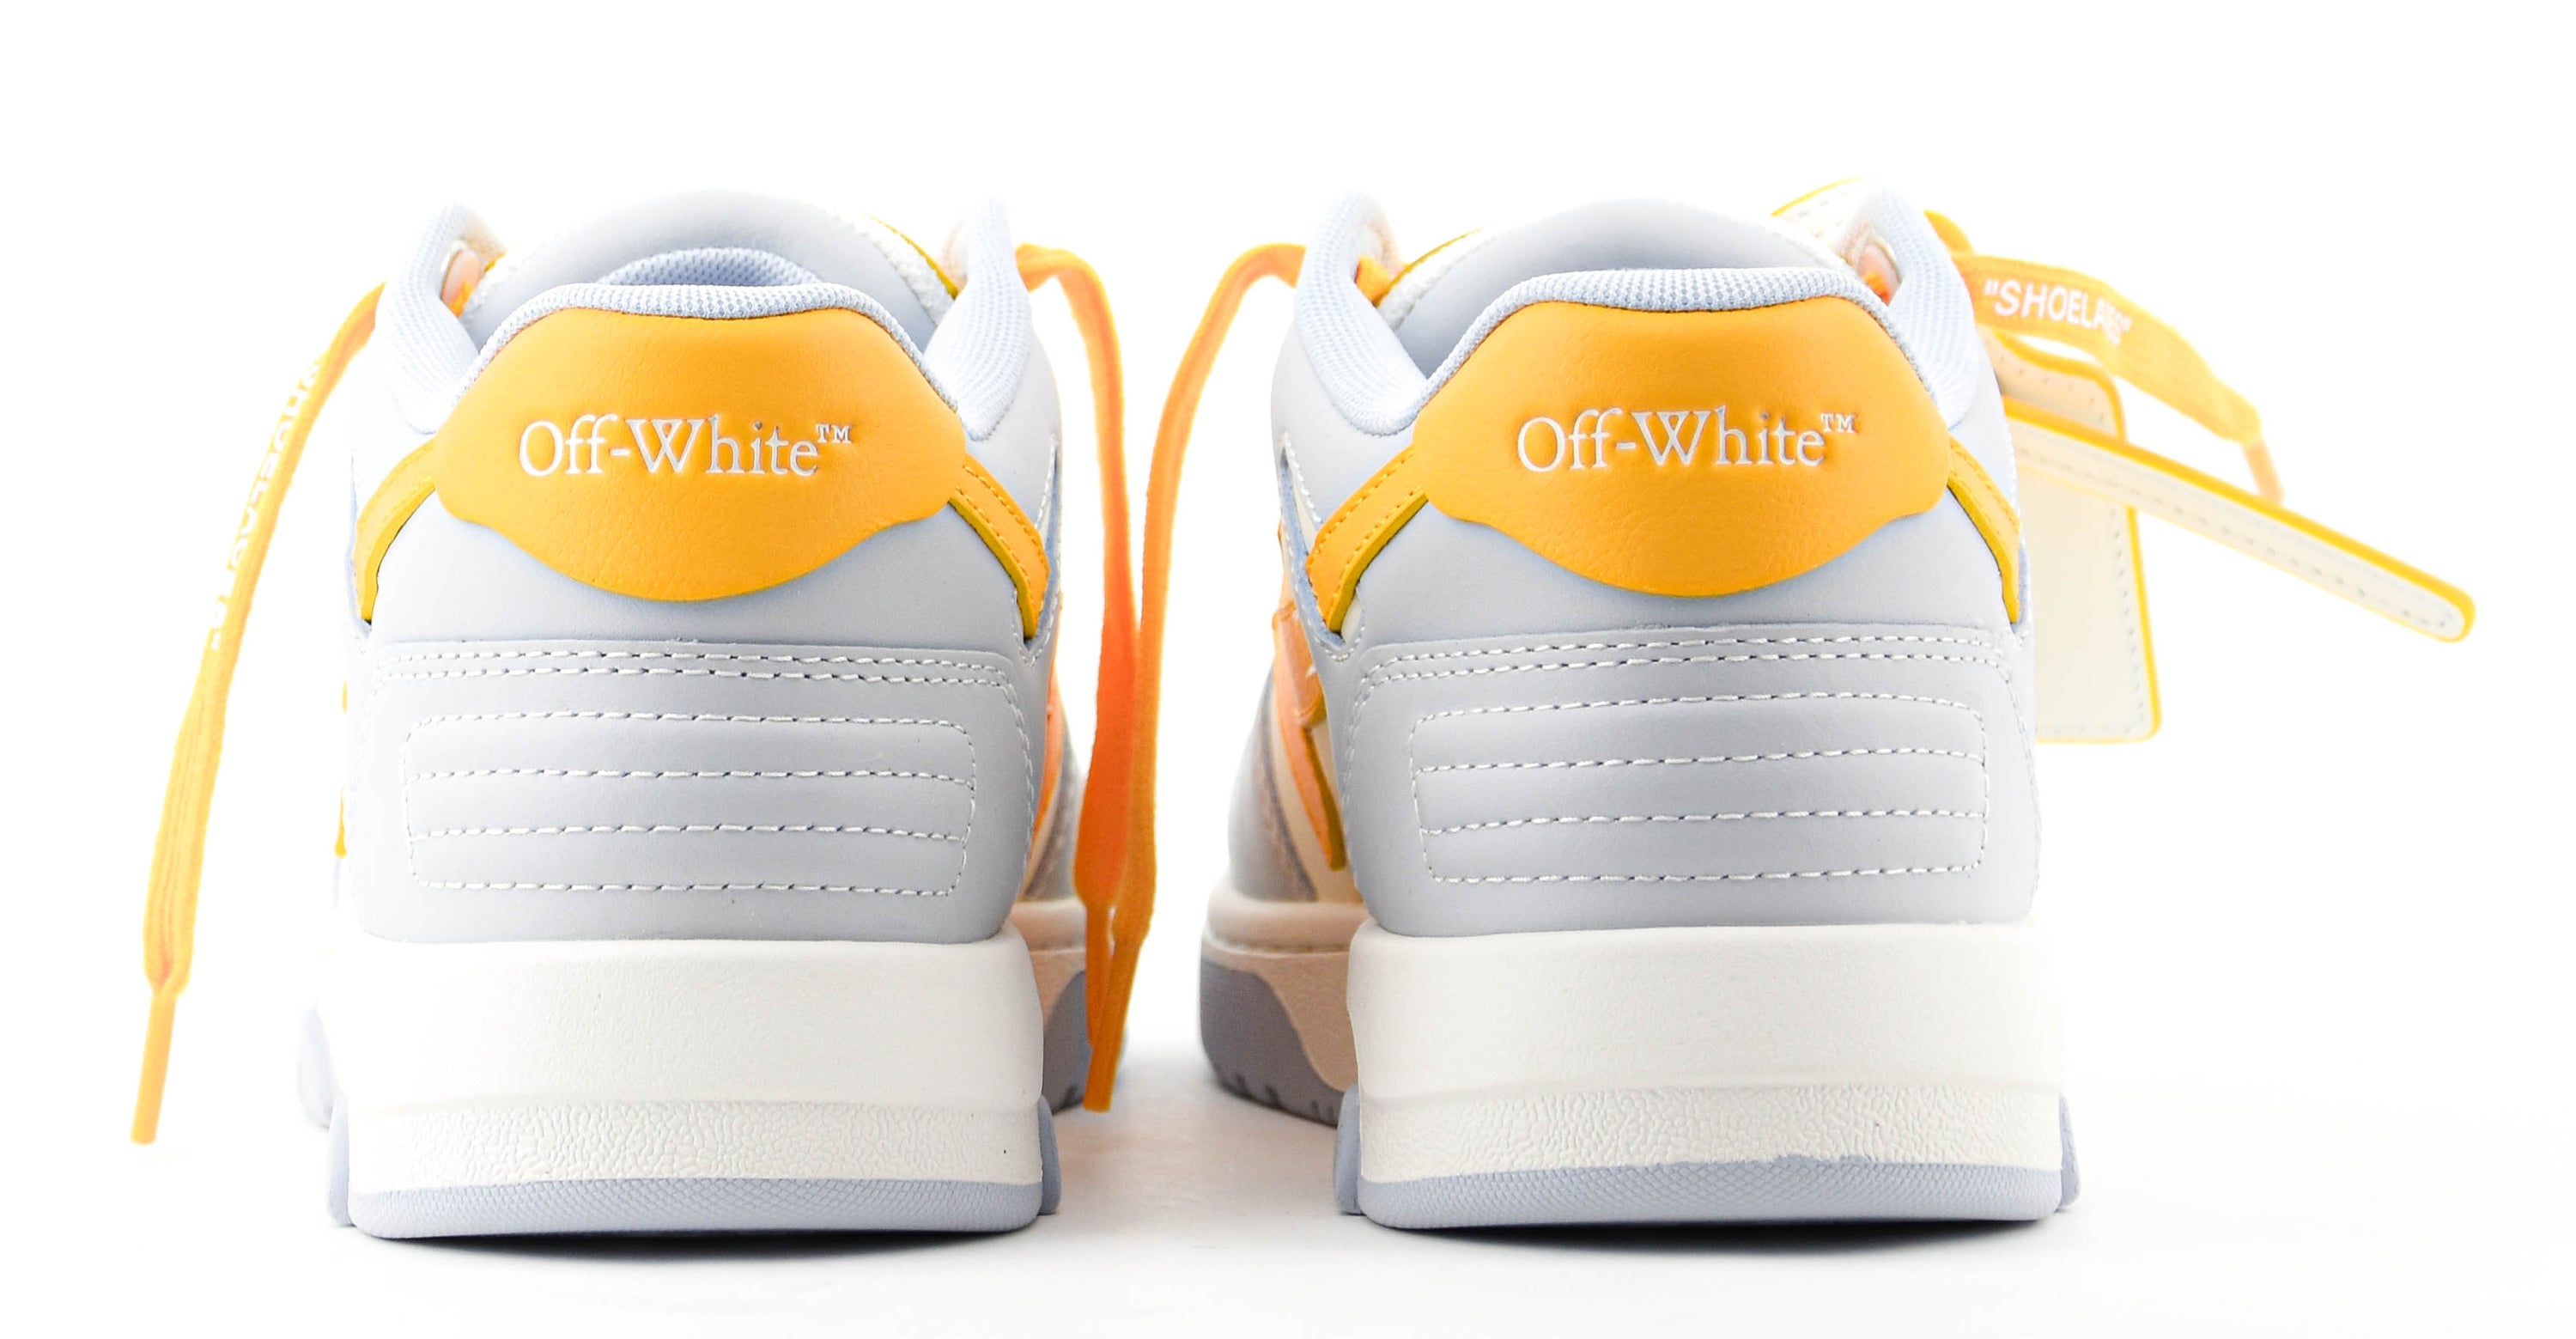 OFFWHITE OUTOFOFFICE LIGHT BLUE YELLOW